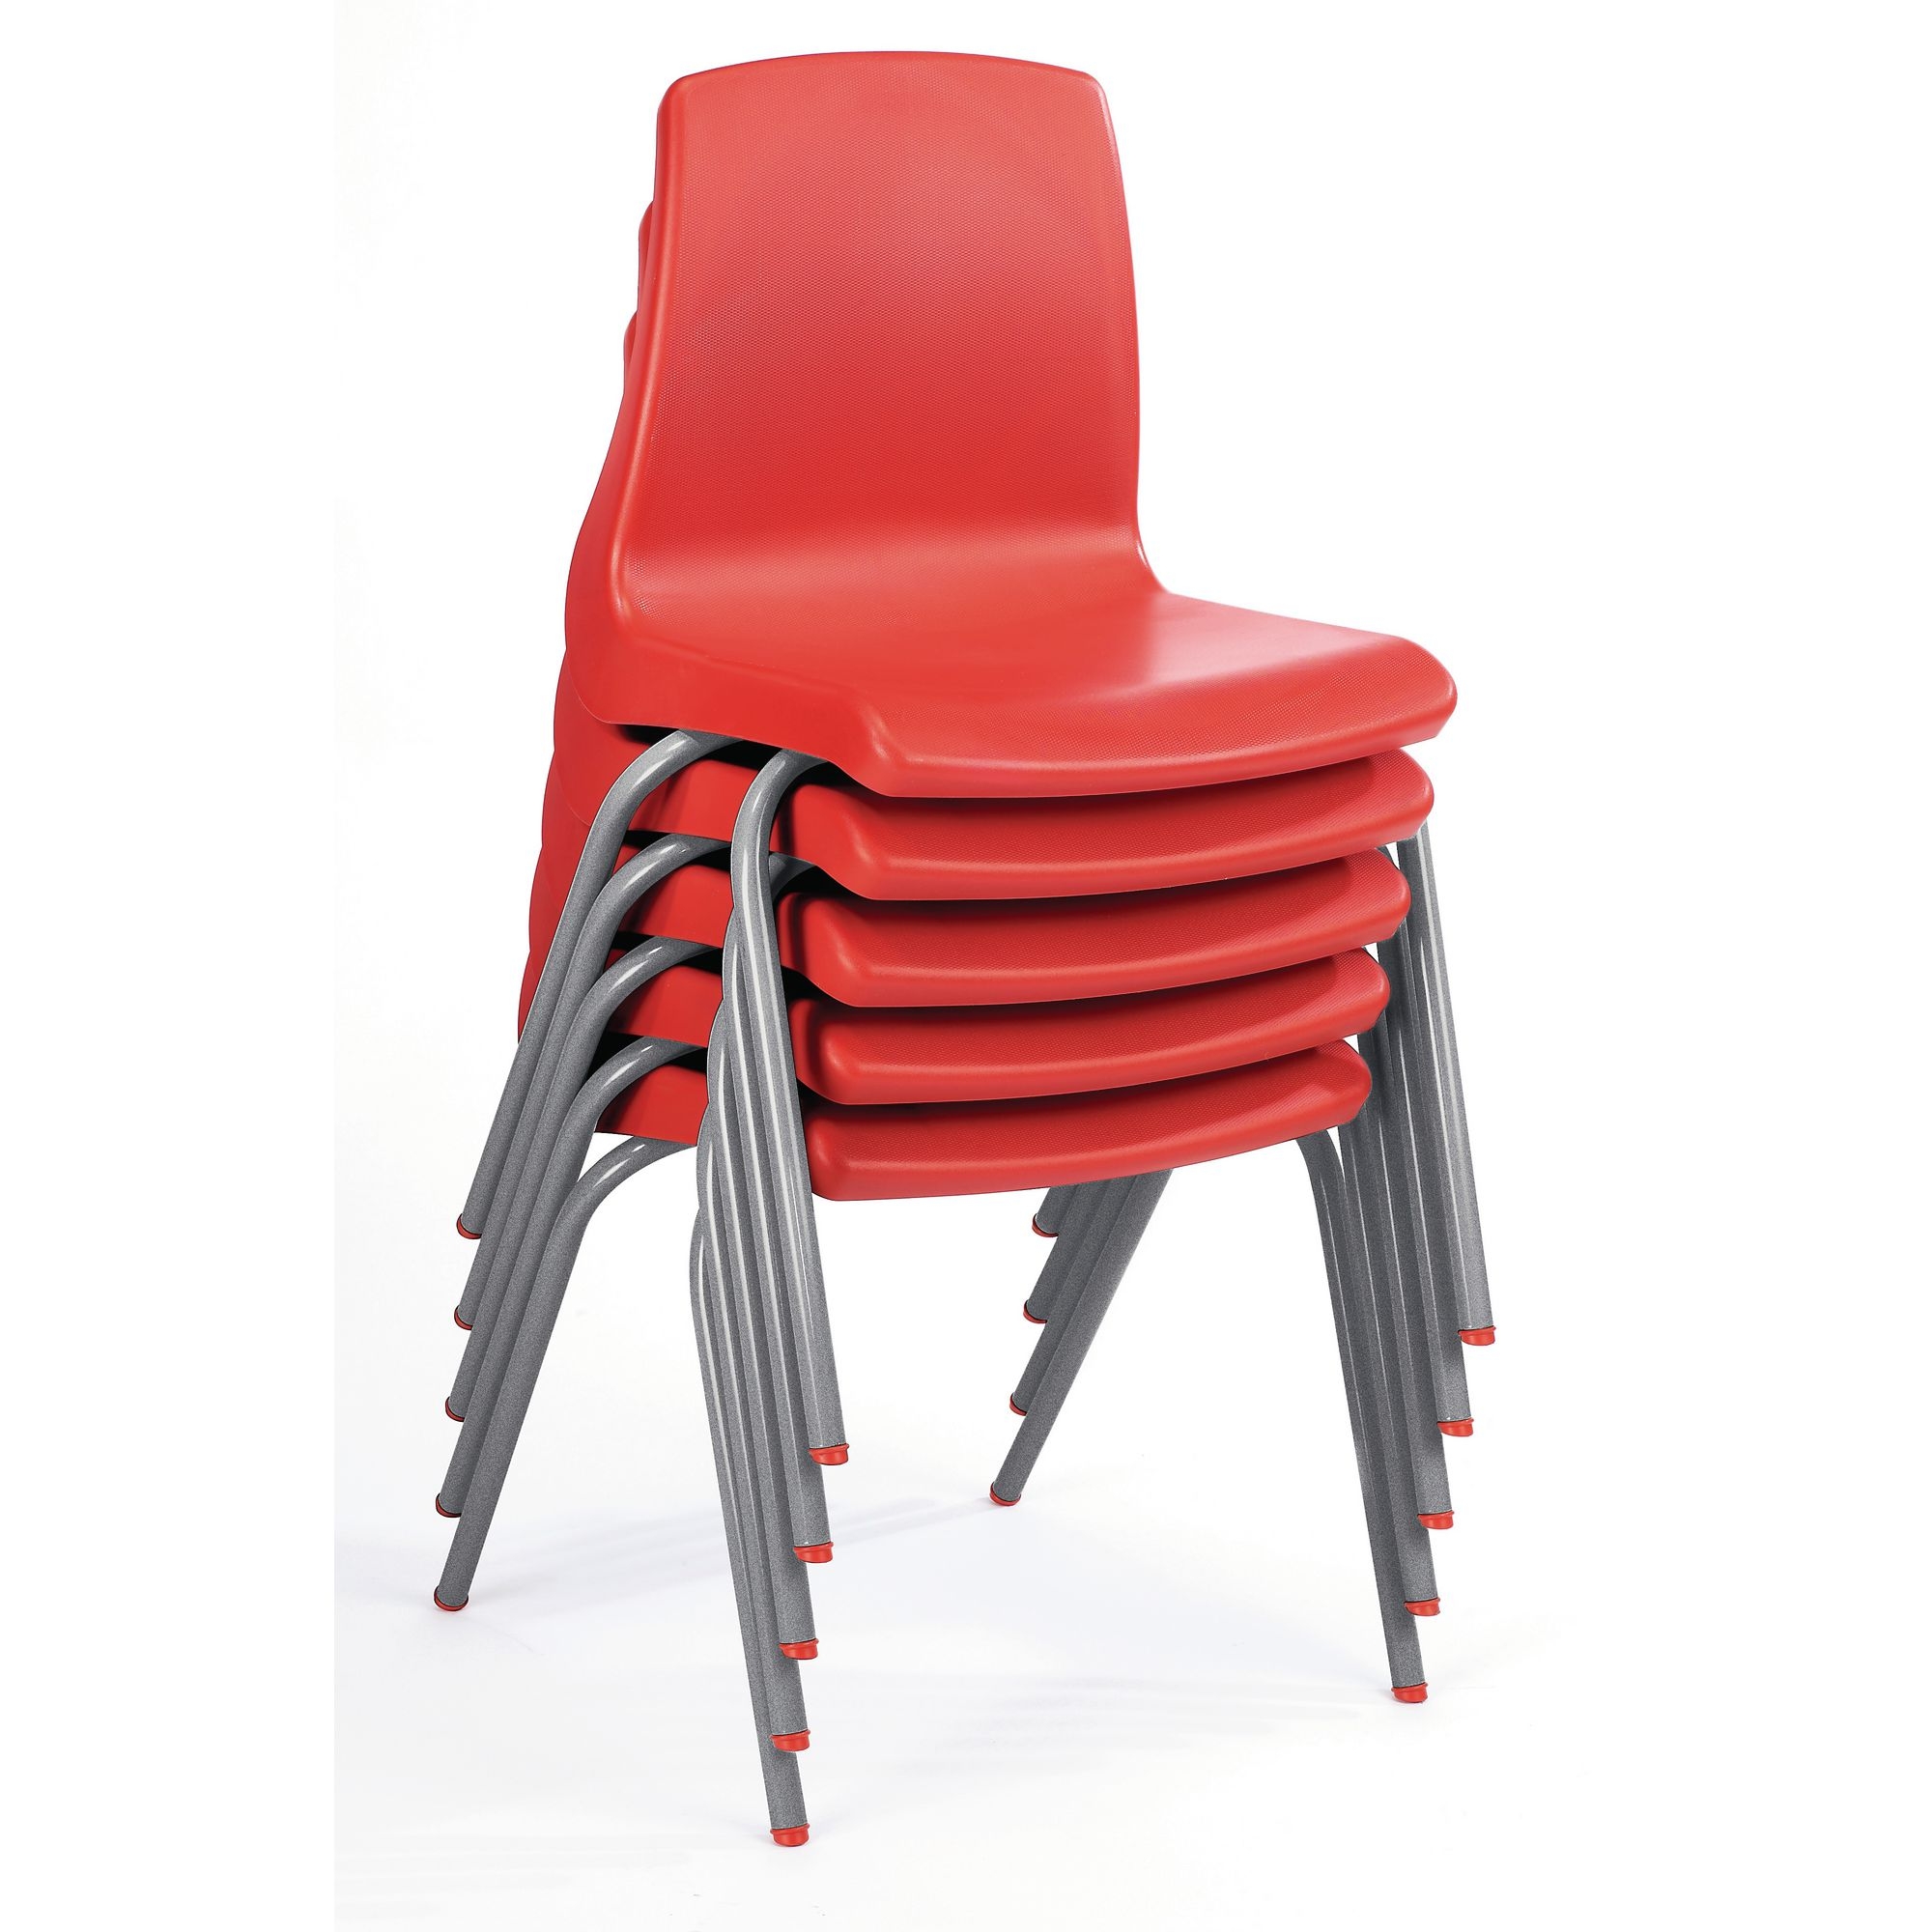 NP Chair Class Pack - Seat height: 380mm - Age 6-8 -Red